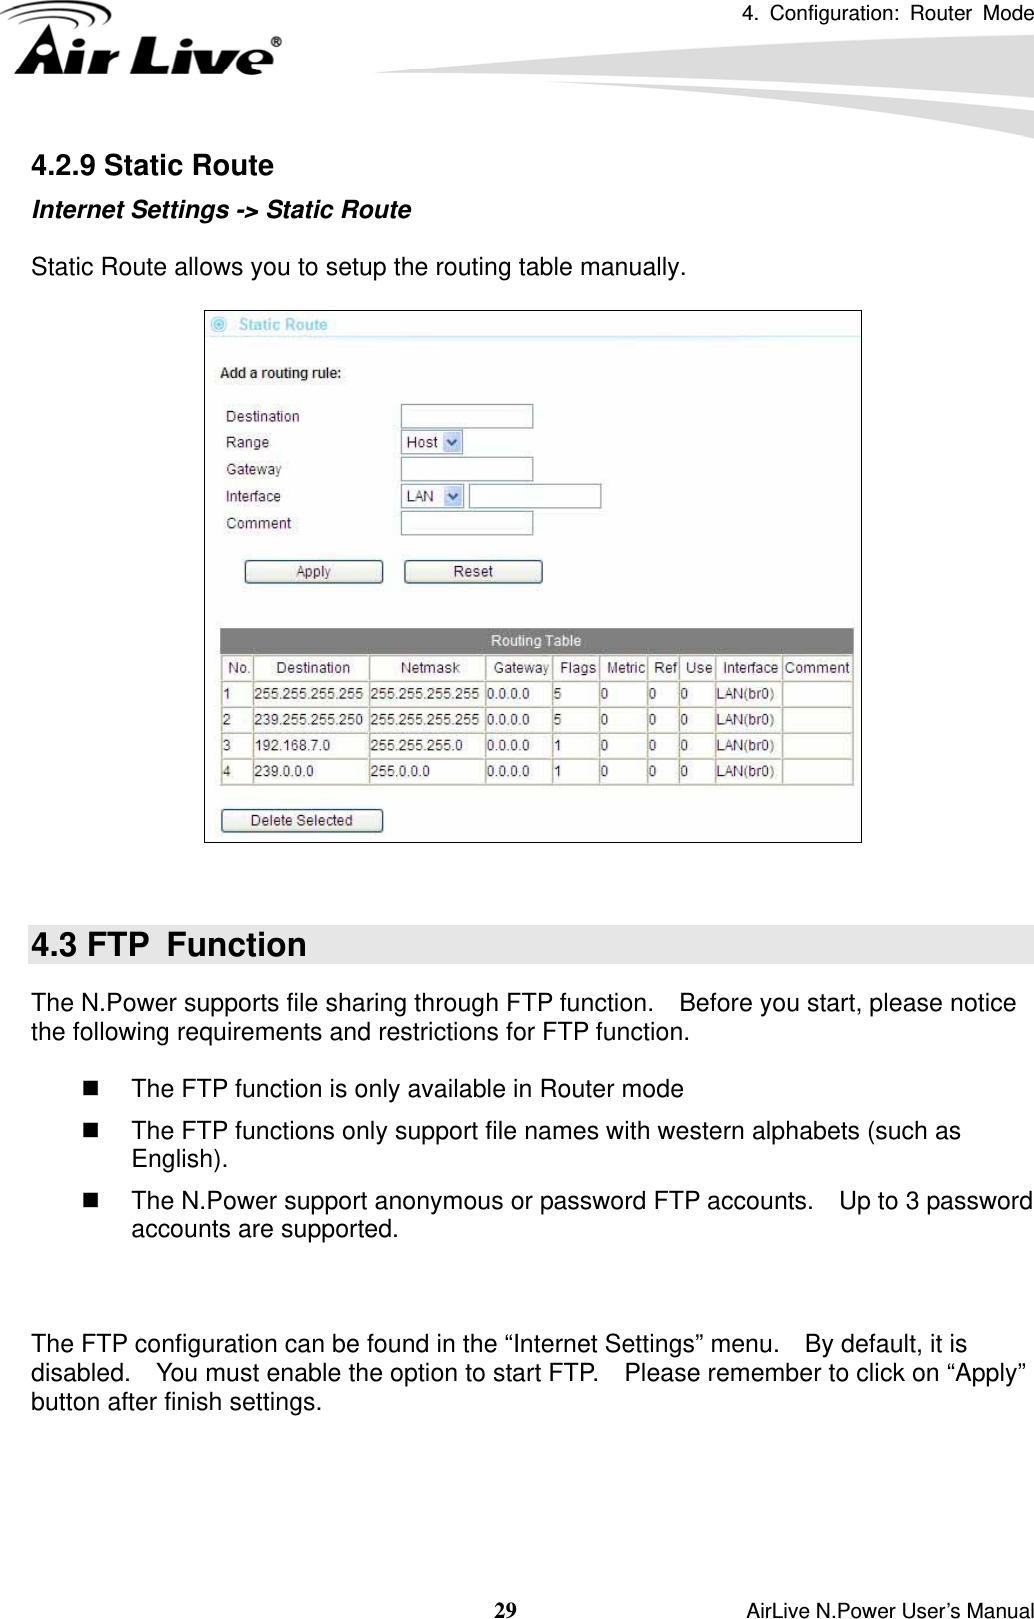 4. Configuration: Router Mode   29                    AirLive N.Power User’s Manual 4.2.9 Static Route Internet Settings -&gt; Static Route  Static Route allows you to setup the routing table manually.     4.3 FTP  Function The N.Power supports file sharing through FTP function.    Before you start, please notice the following requirements and restrictions for FTP function.    The FTP function is only available in Router mode   The FTP functions only support file names with western alphabets (such as English).     The N.Power support anonymous or password FTP accounts.    Up to 3 password accounts are supported.    The FTP configuration can be found in the “Internet Settings” menu.    By default, it is disabled.    You must enable the option to start FTP.    Please remember to click on “Apply” button after finish settings.  